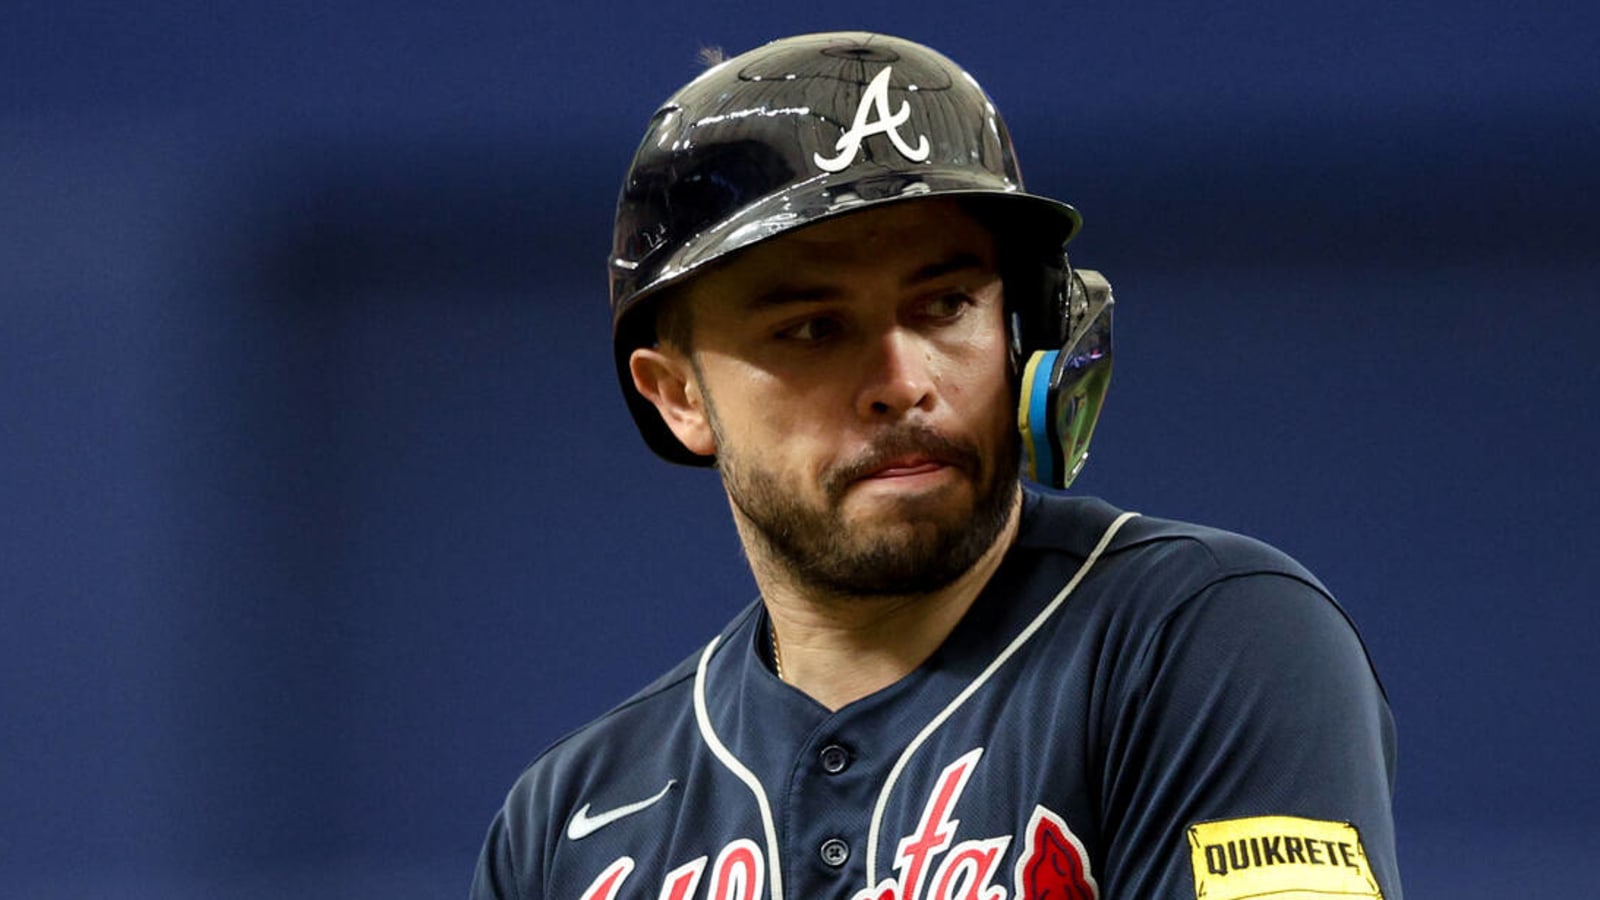 Braves sign Travis d'Arnaud to 2-year contract